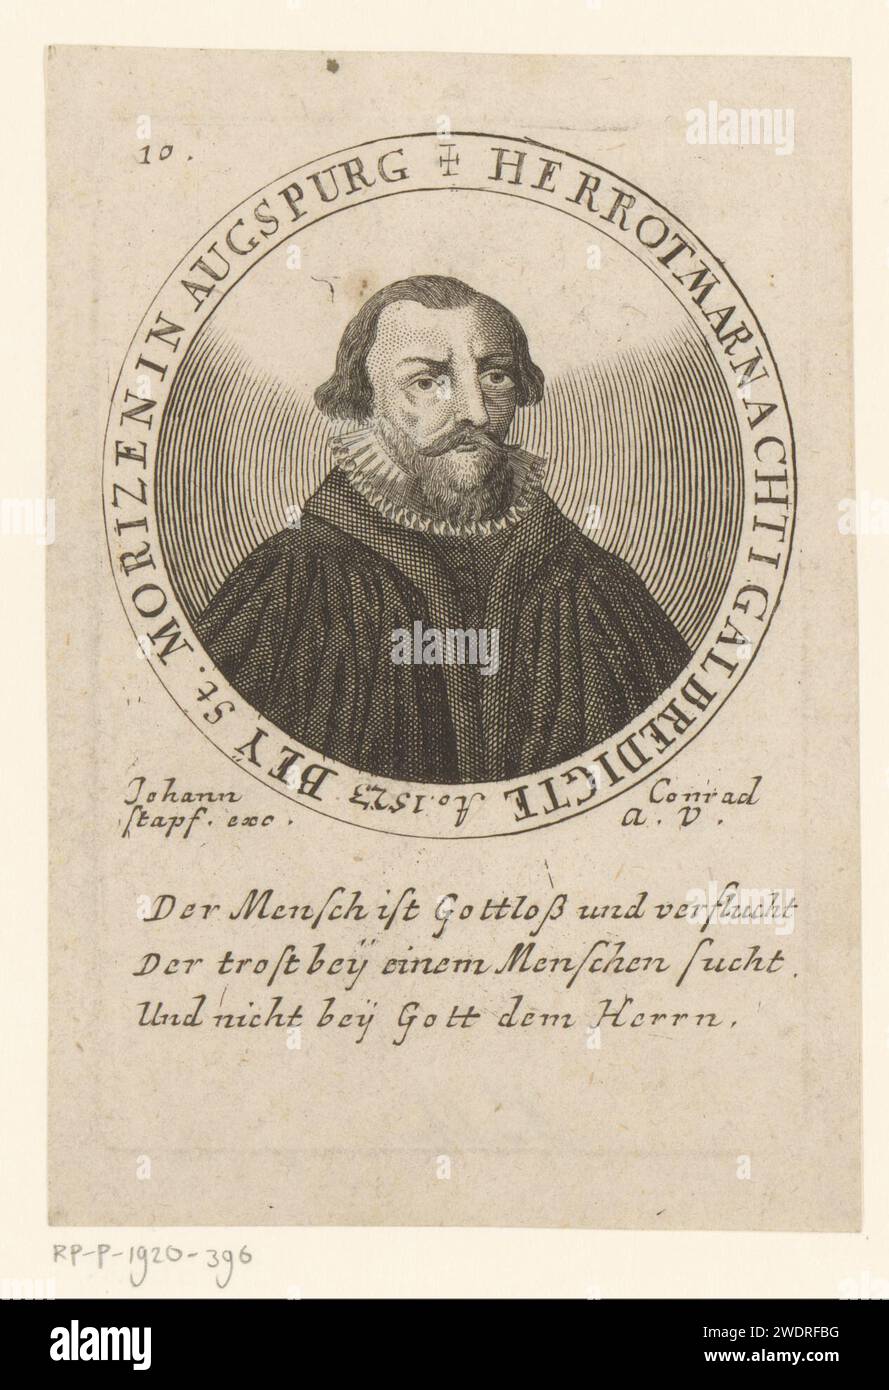 Portrait of Othmar Luscinus, Anonymous, Johann Conrad Stapf (16th century), 1523 - c. 1600 print Numbered in the top left: 10. Augsburg paper engraving / etching historical persons Stock Photo